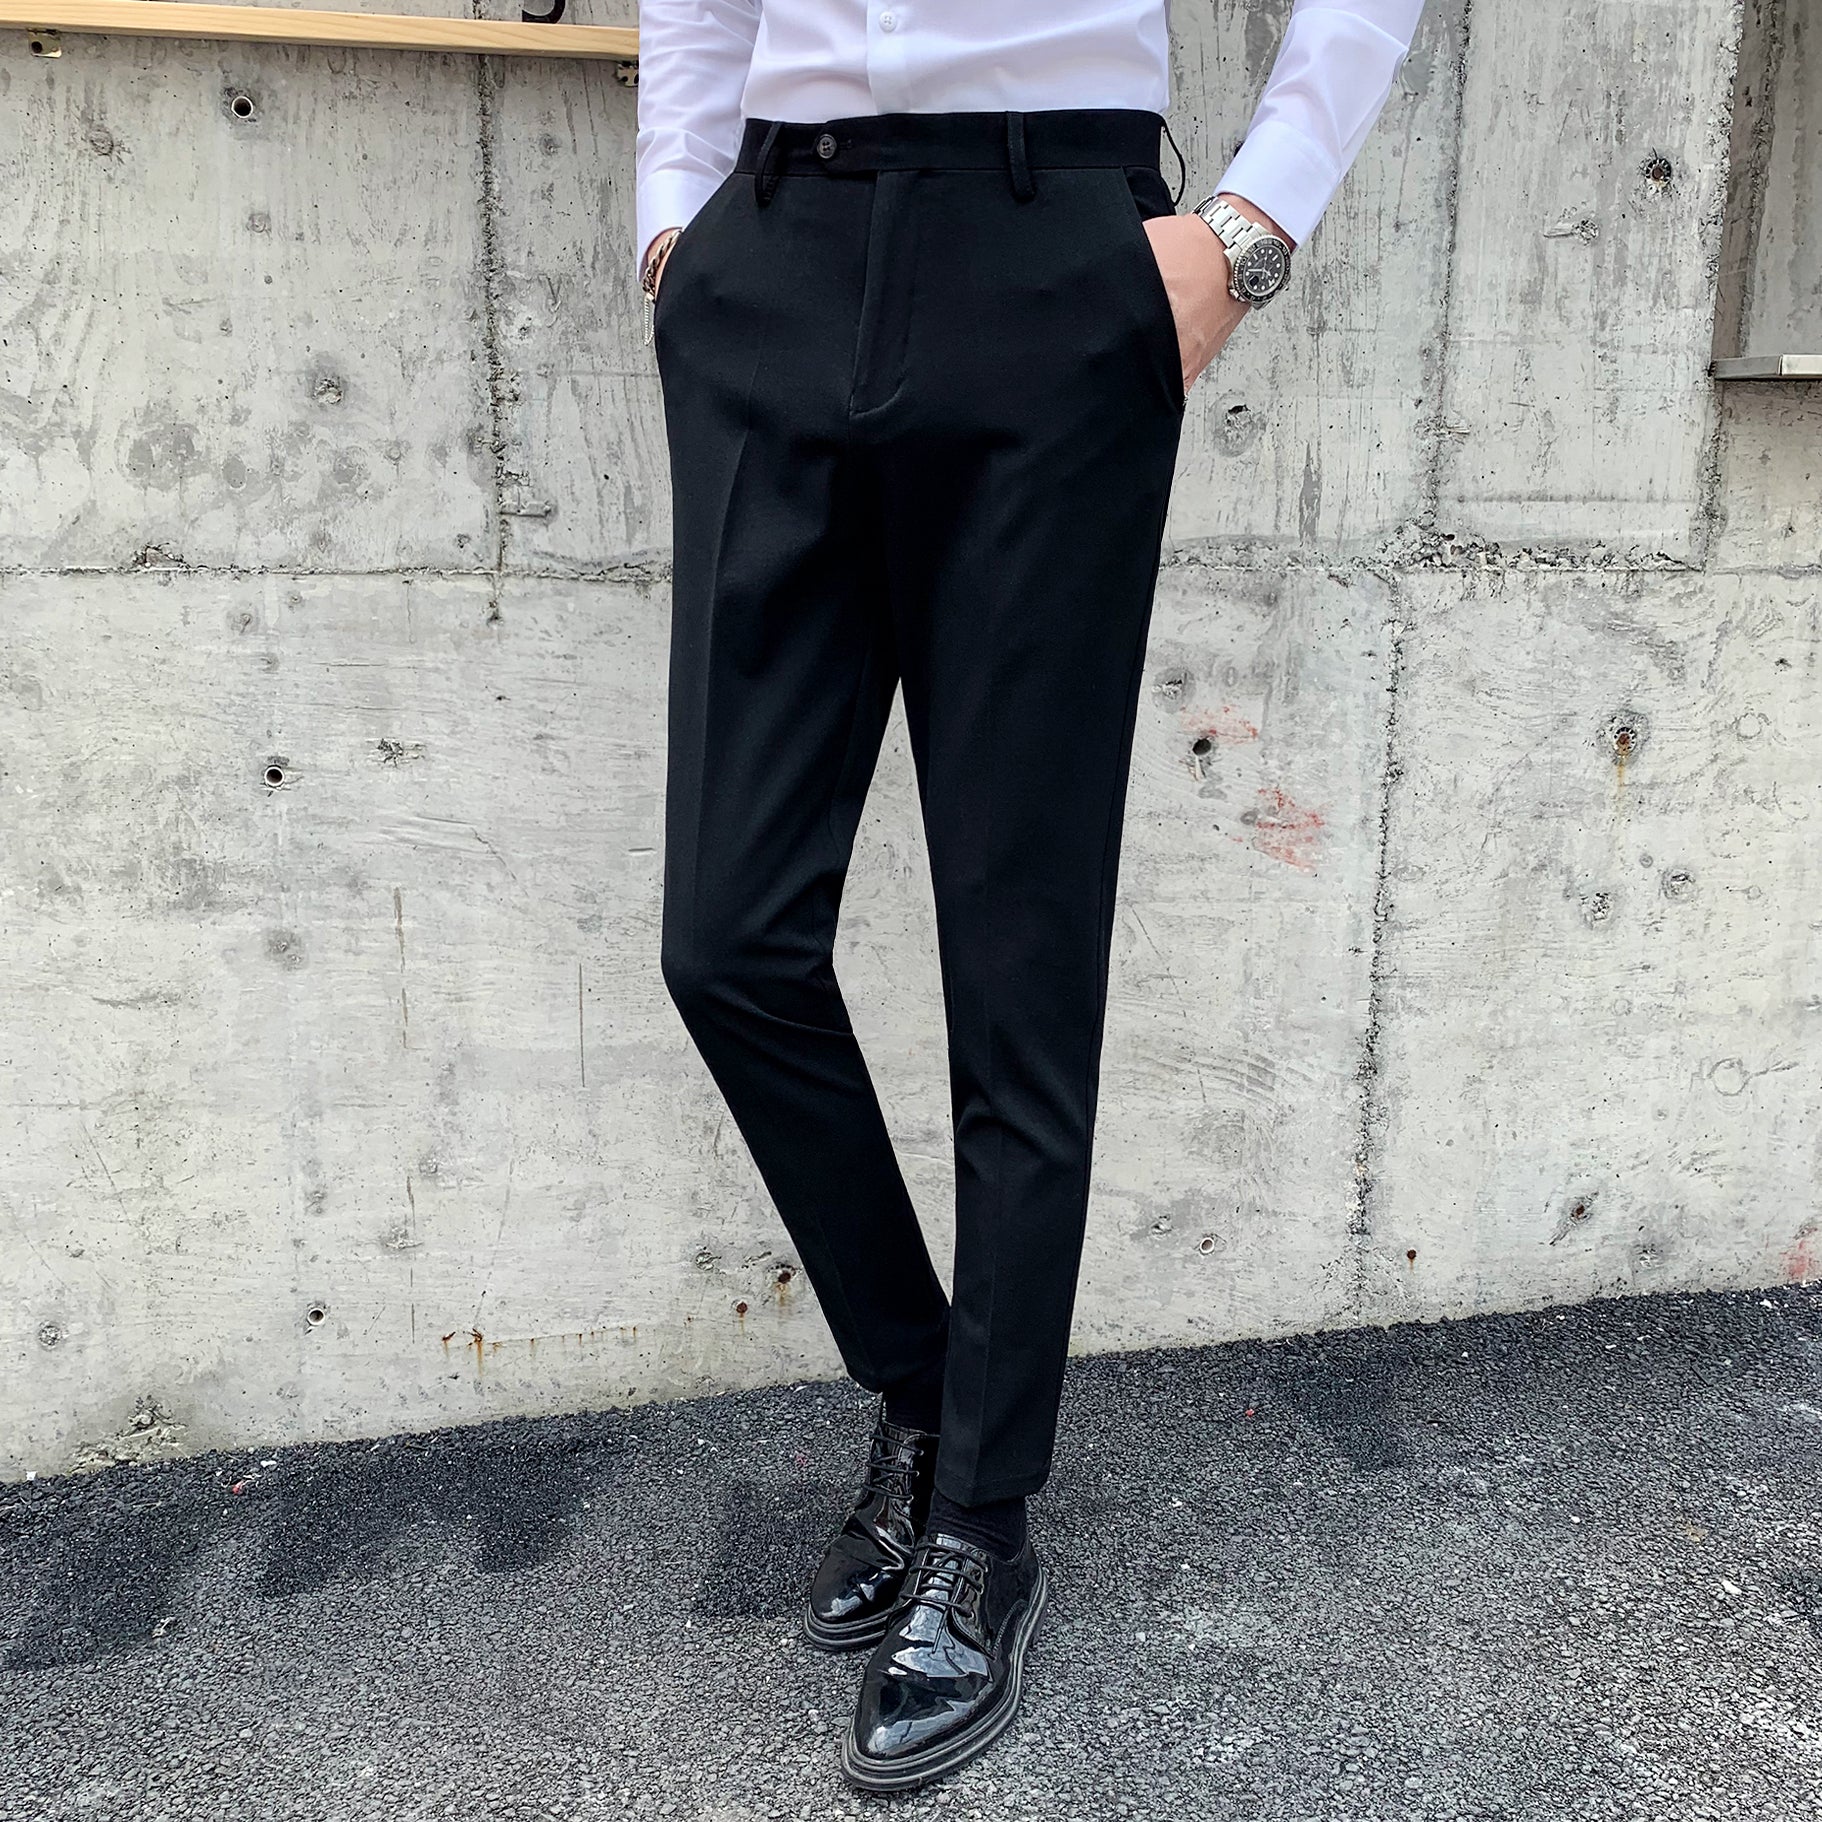 Solid Dress Pants Flat-Front Trousers in 3 Colors